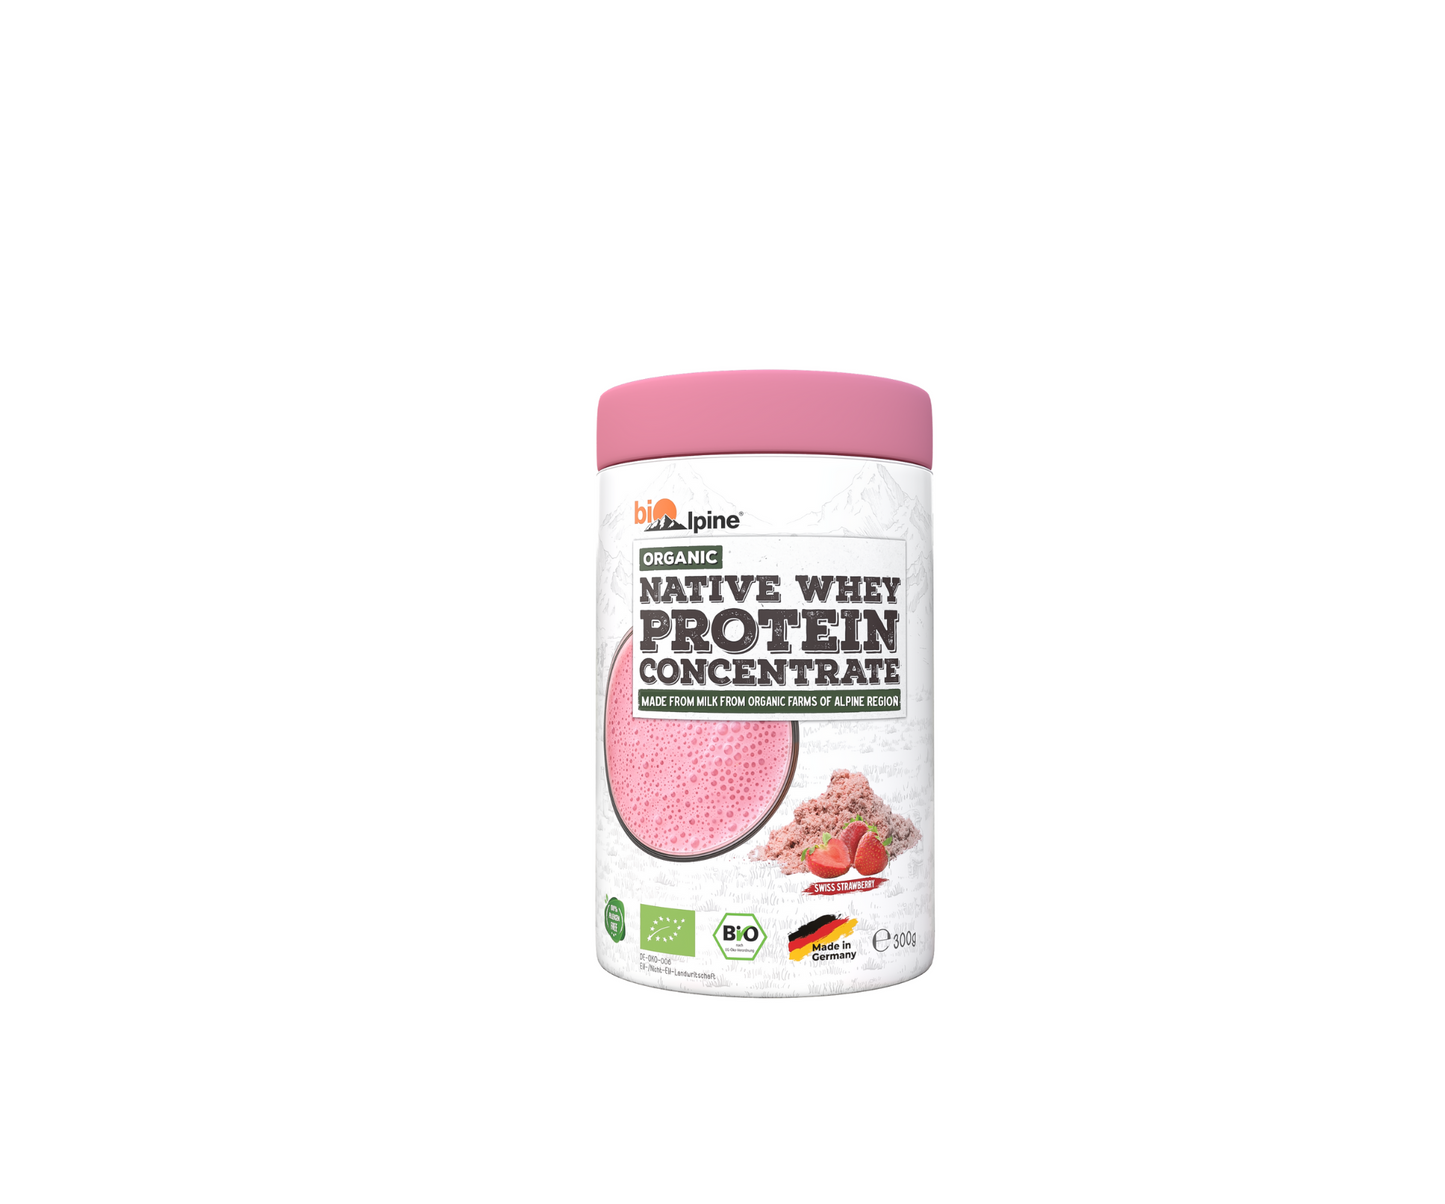 Native whey protein concentrate swiss strawberry